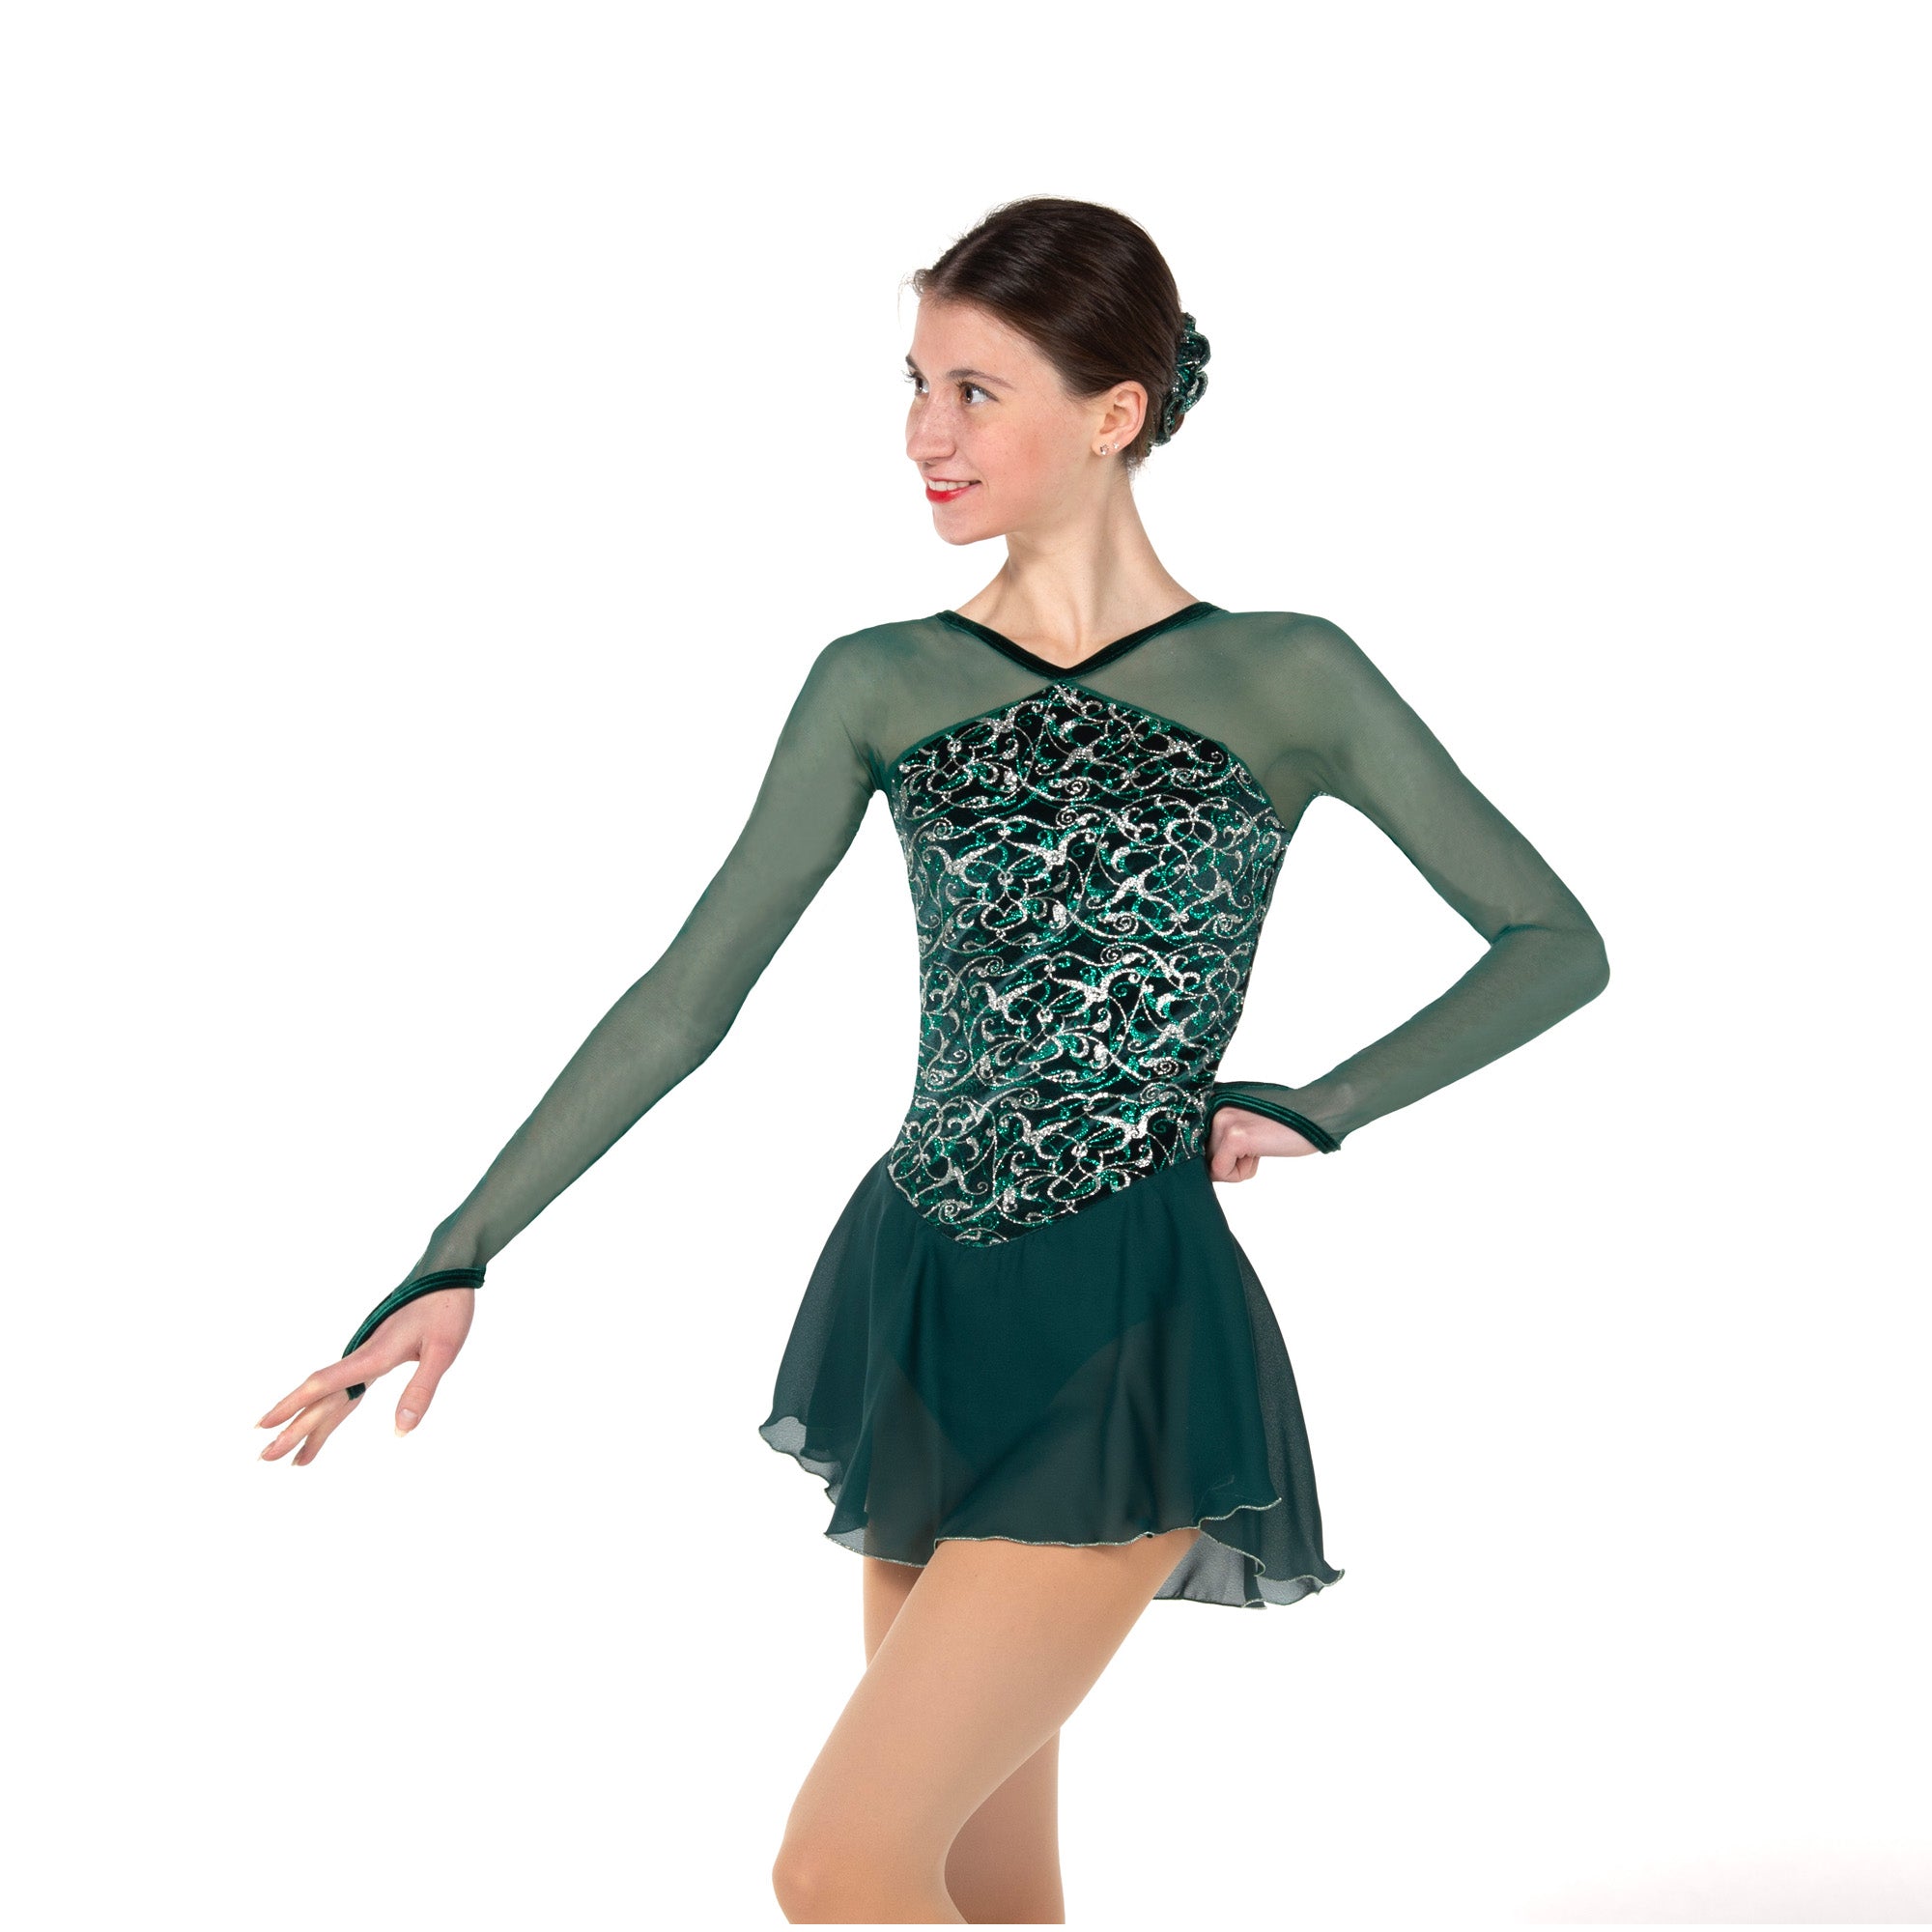 12 Vignette Skating Dress in Pine Green by Jerry's